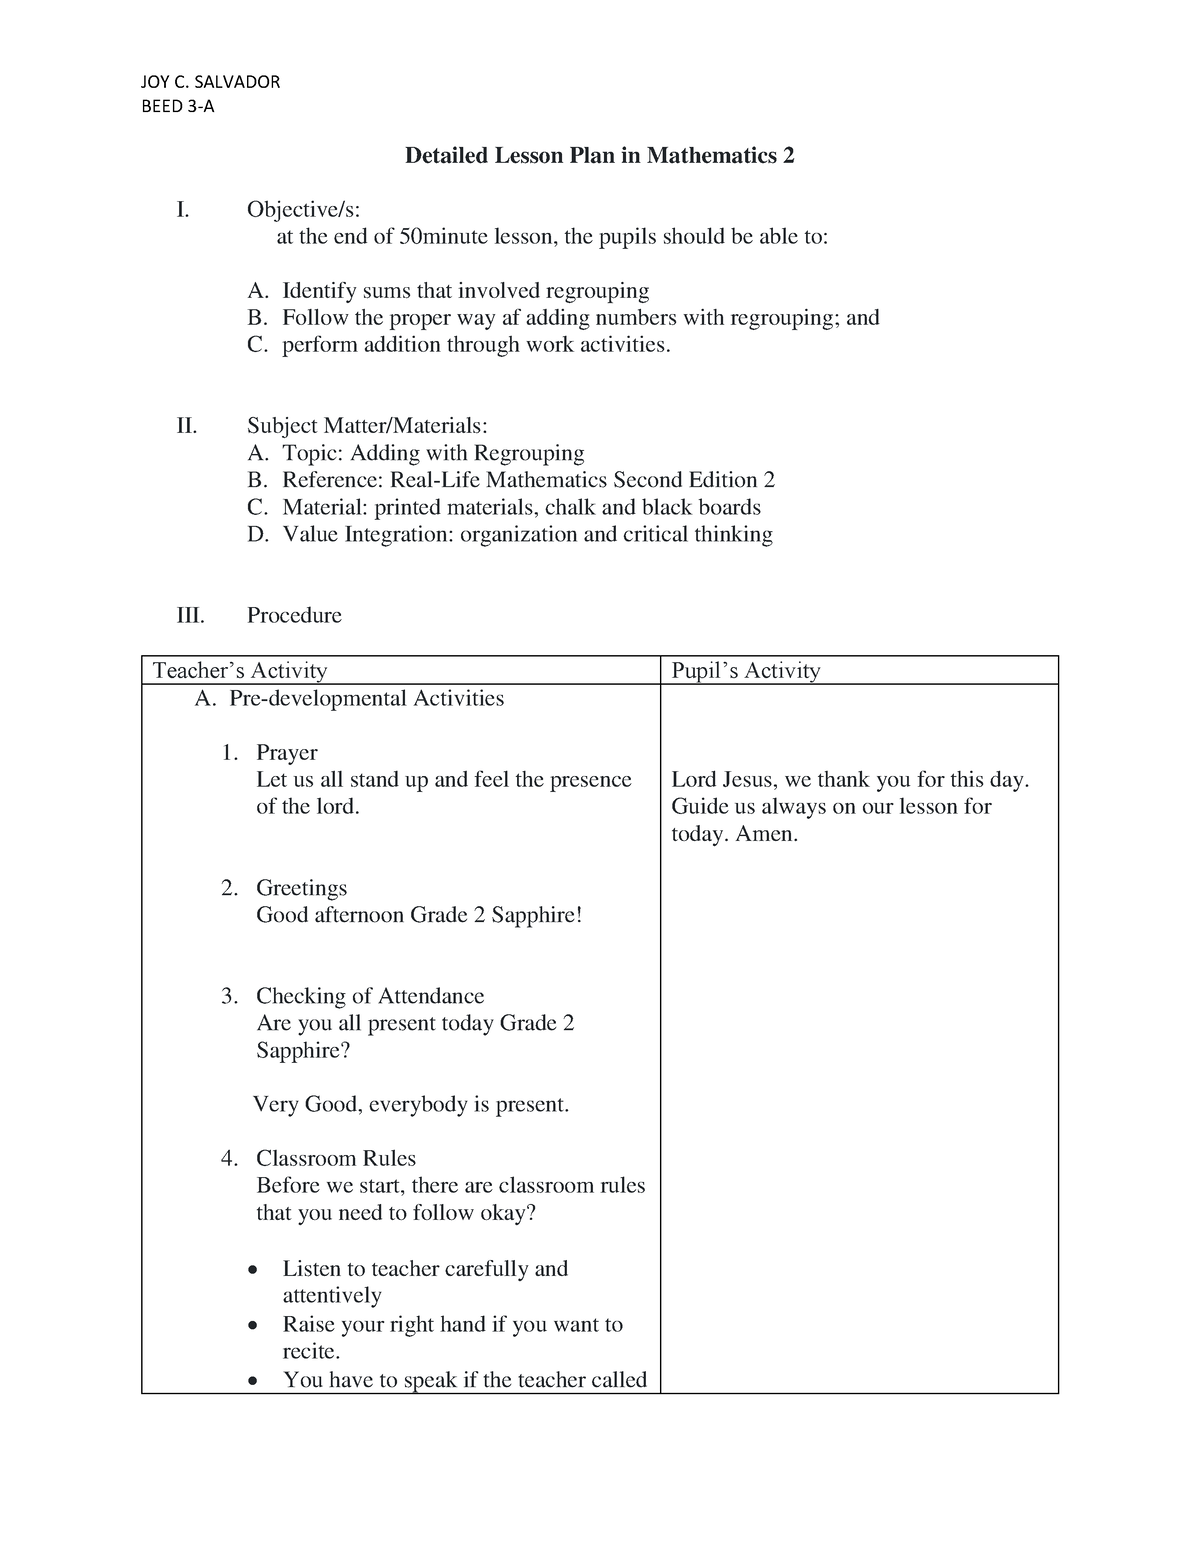 adding-with-regrouping-lesson-plan-2-beed-3-a-detailed-lesson-plan-in